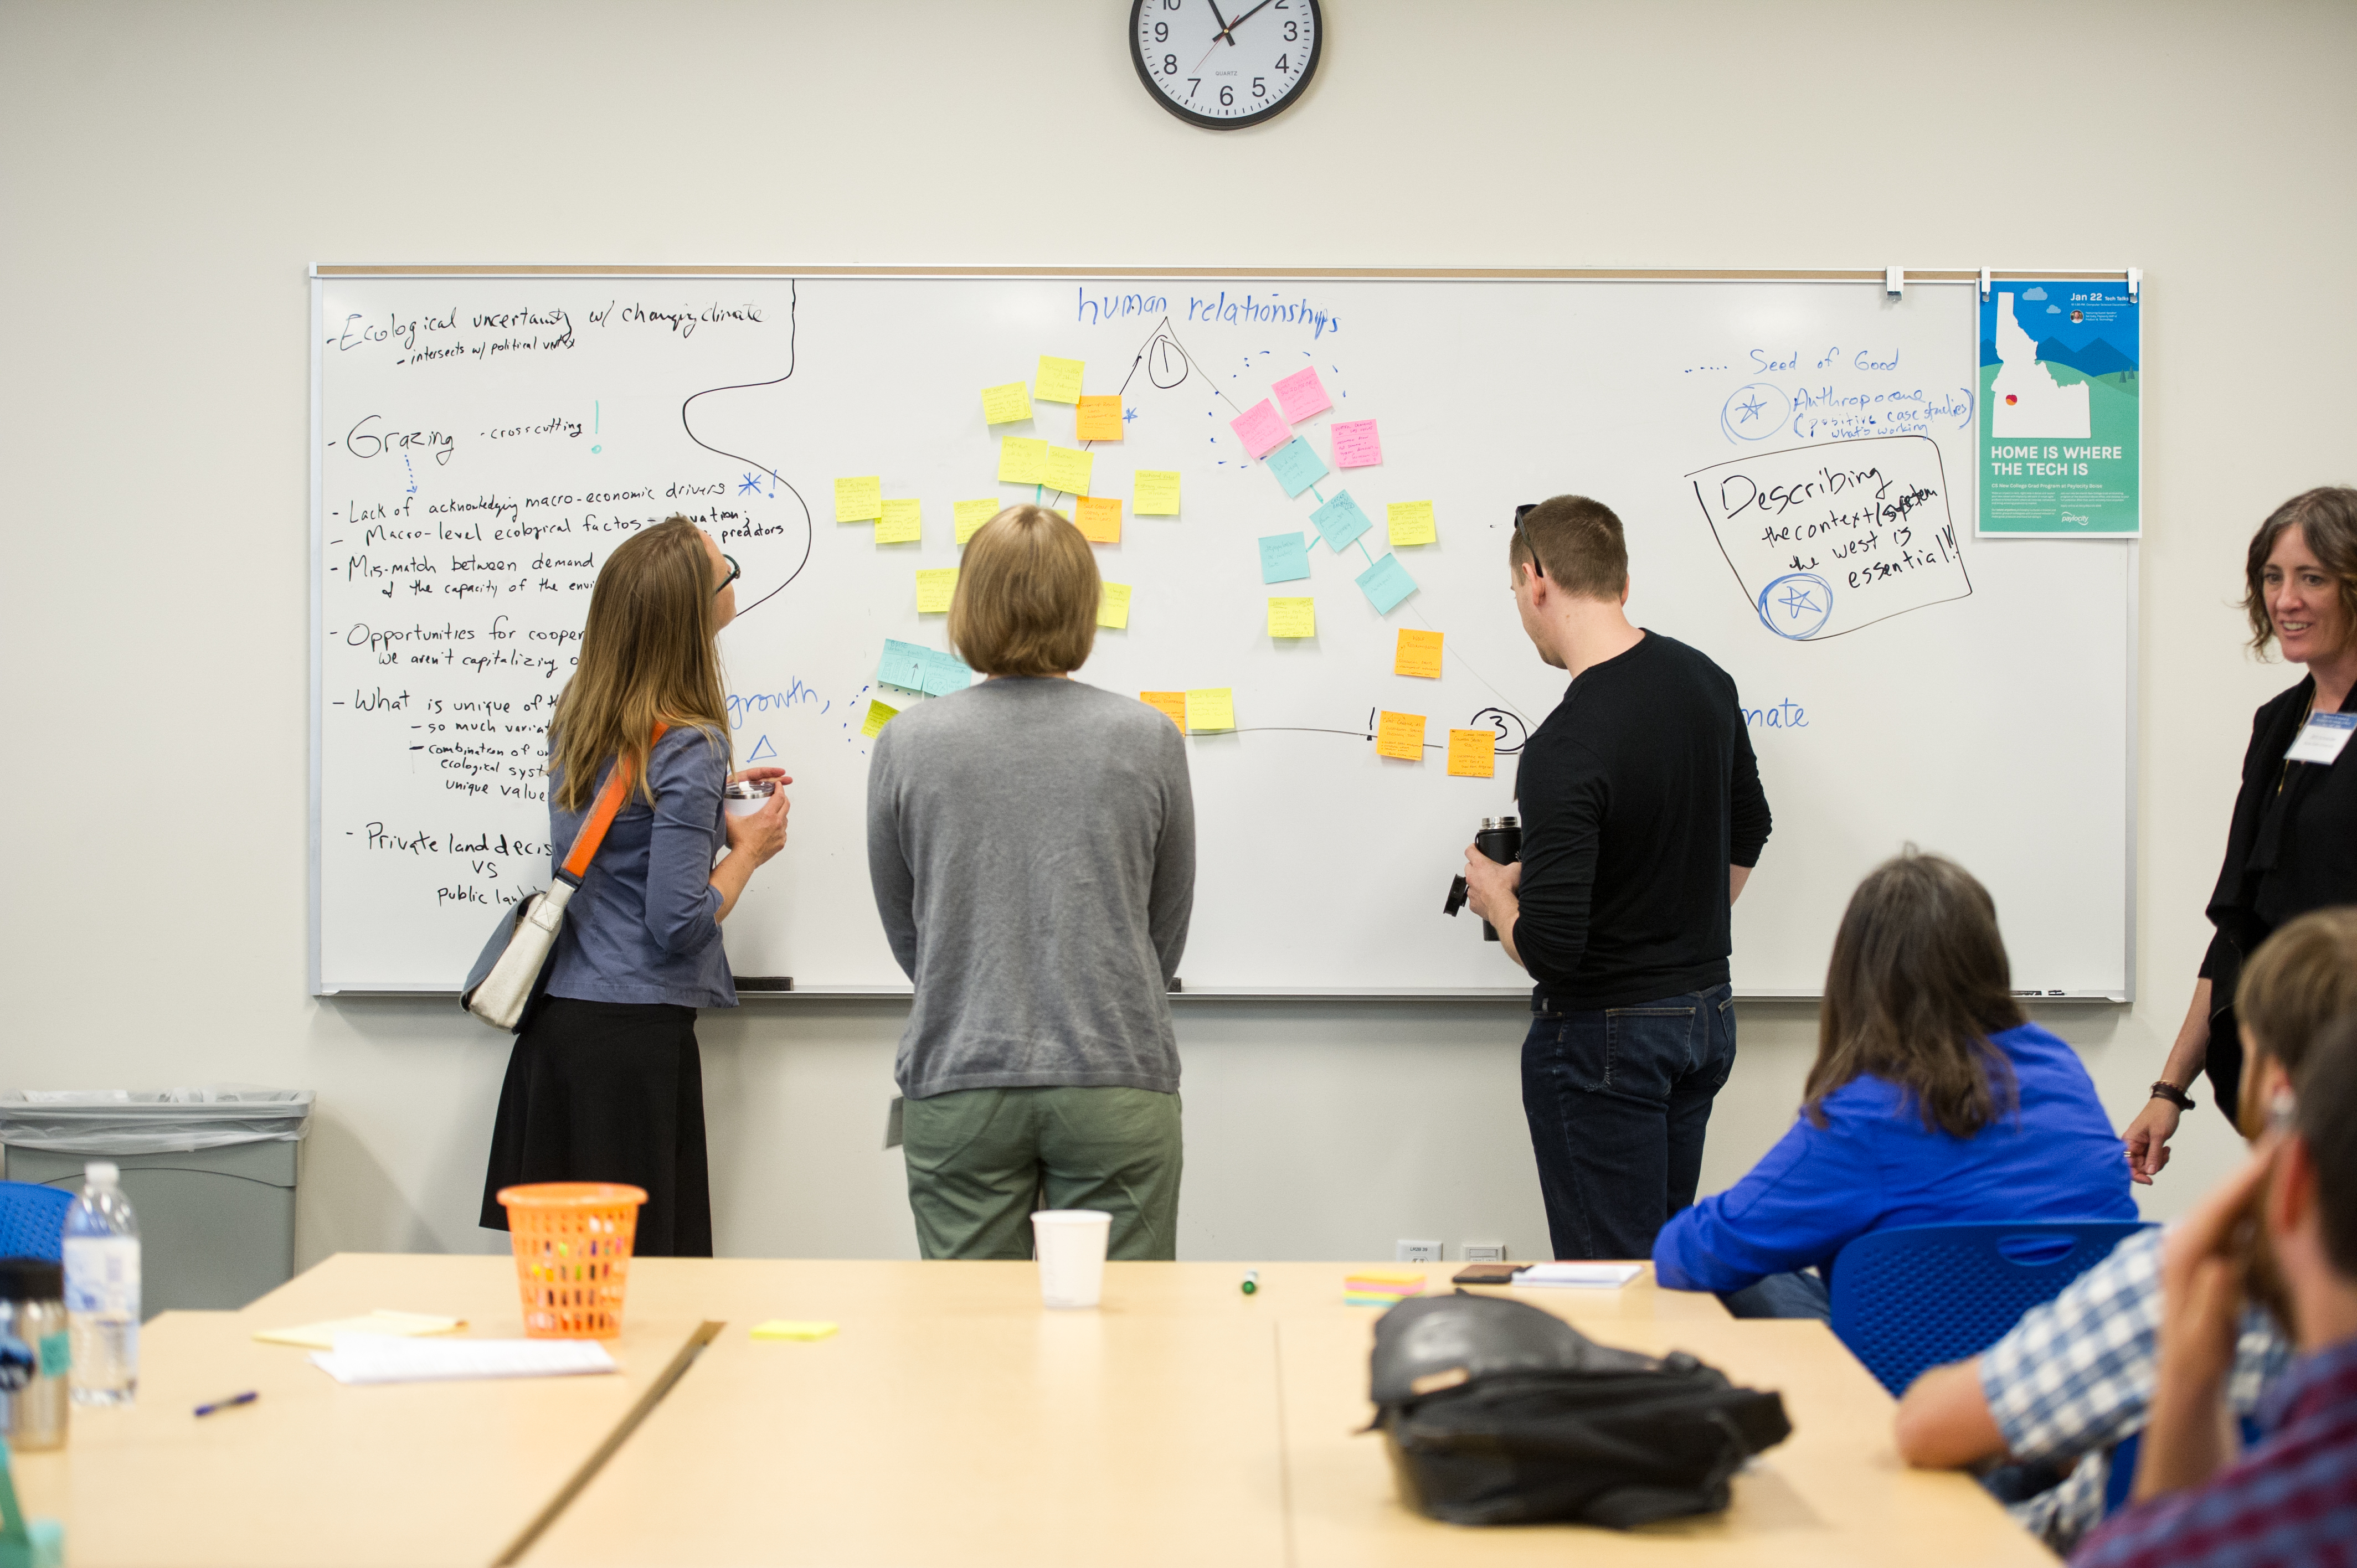 Backs of three people looking at a white board filled with sticky notes